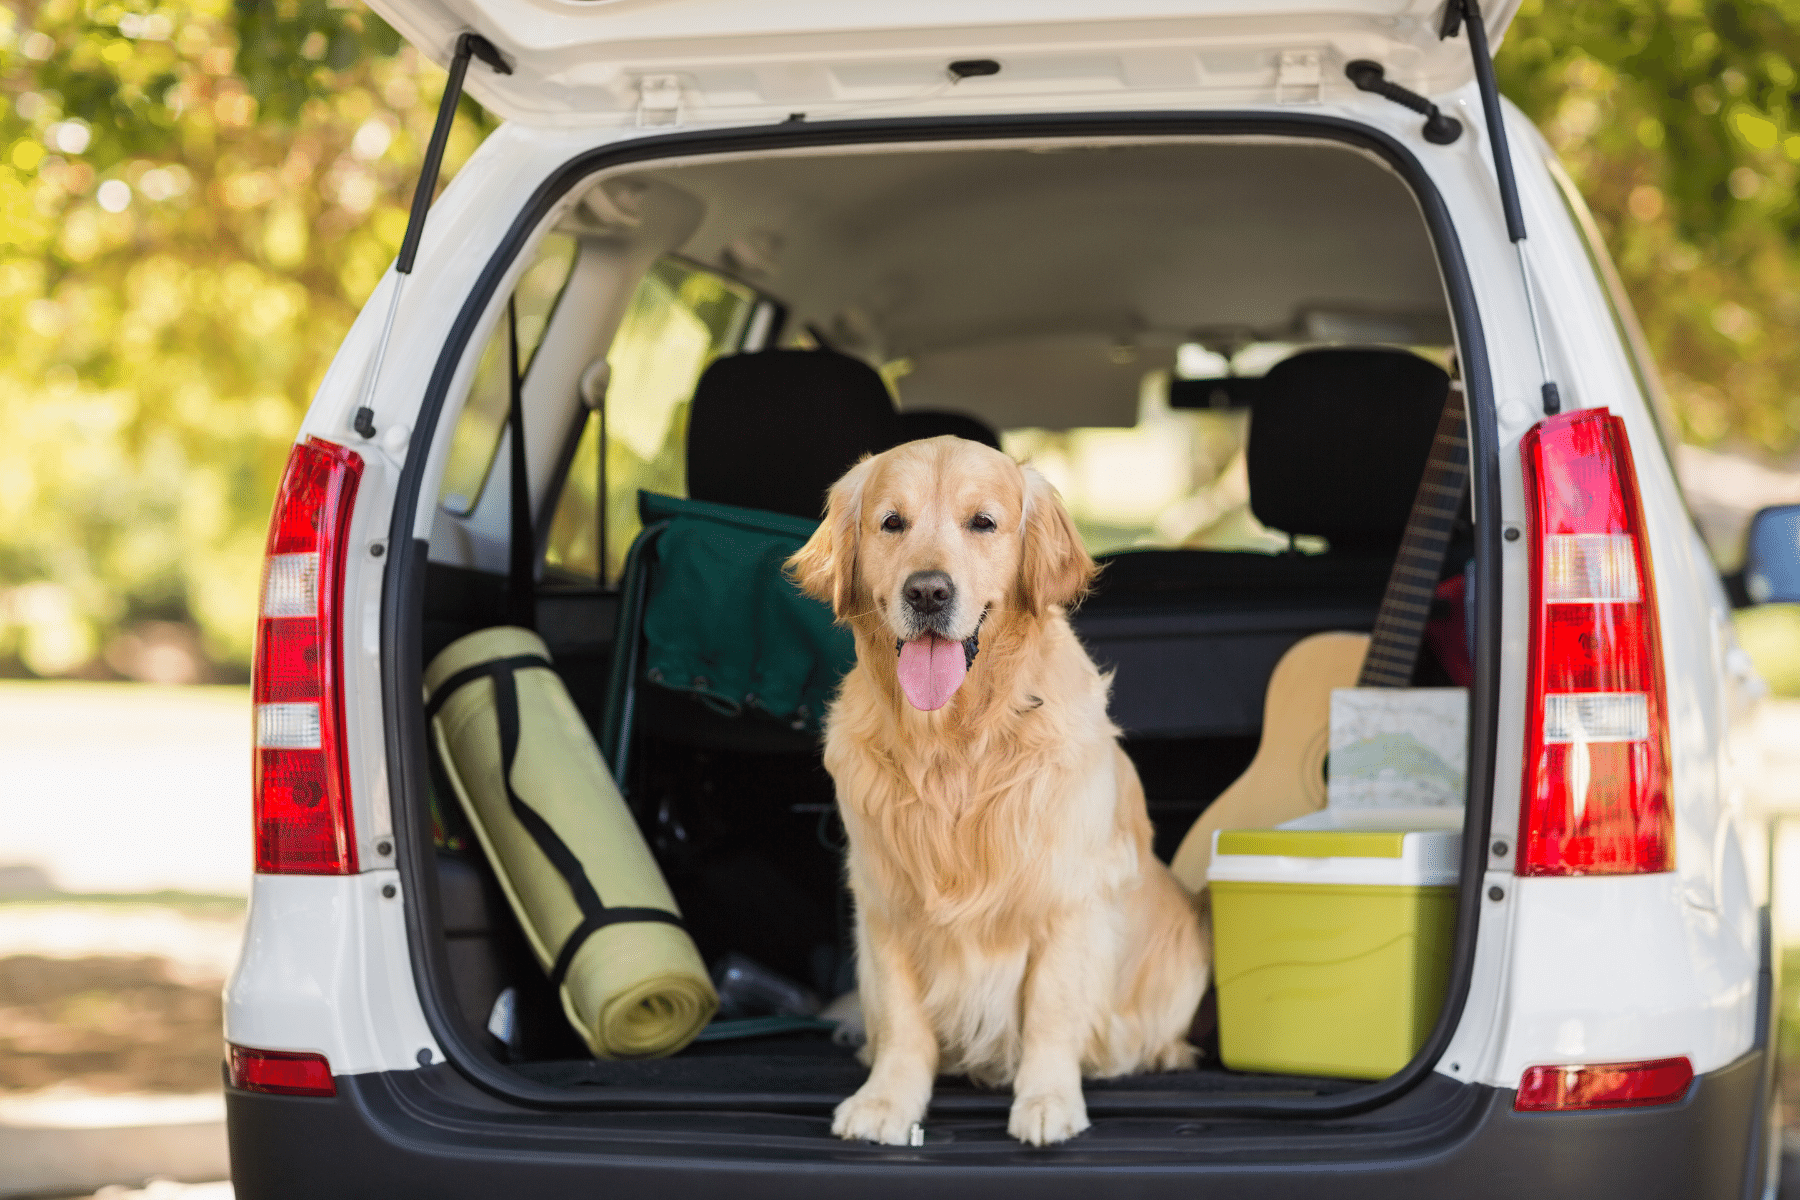 Dog Travel Checklist: What To Pack When Traveling With Your Dog